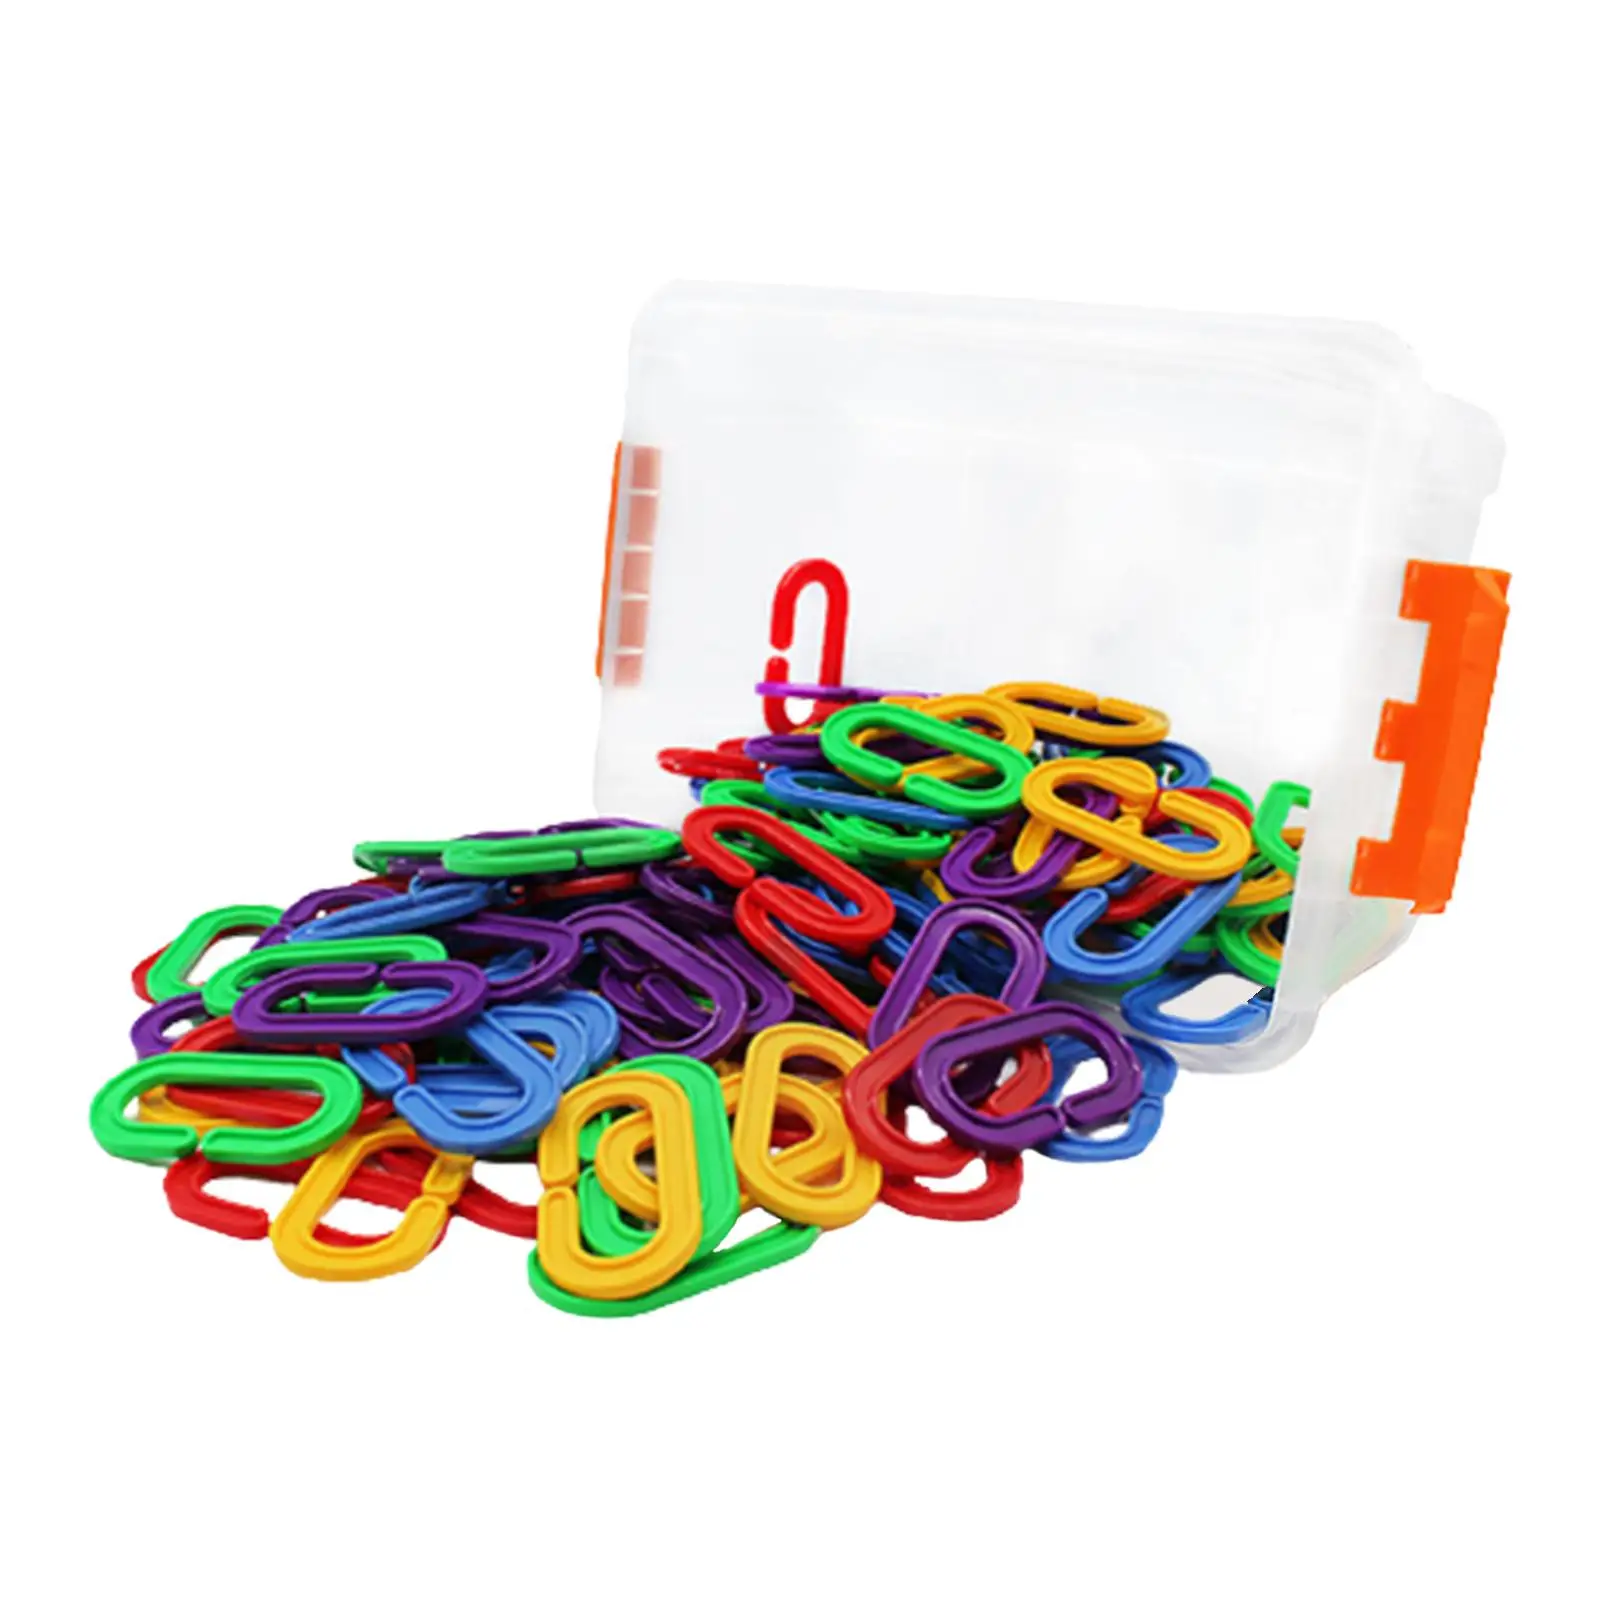 150x C Hook Rainbow C Links, Bird Swing Chain, Counting and Sorting, Fine Motor, Educational Chain Links for Toddler